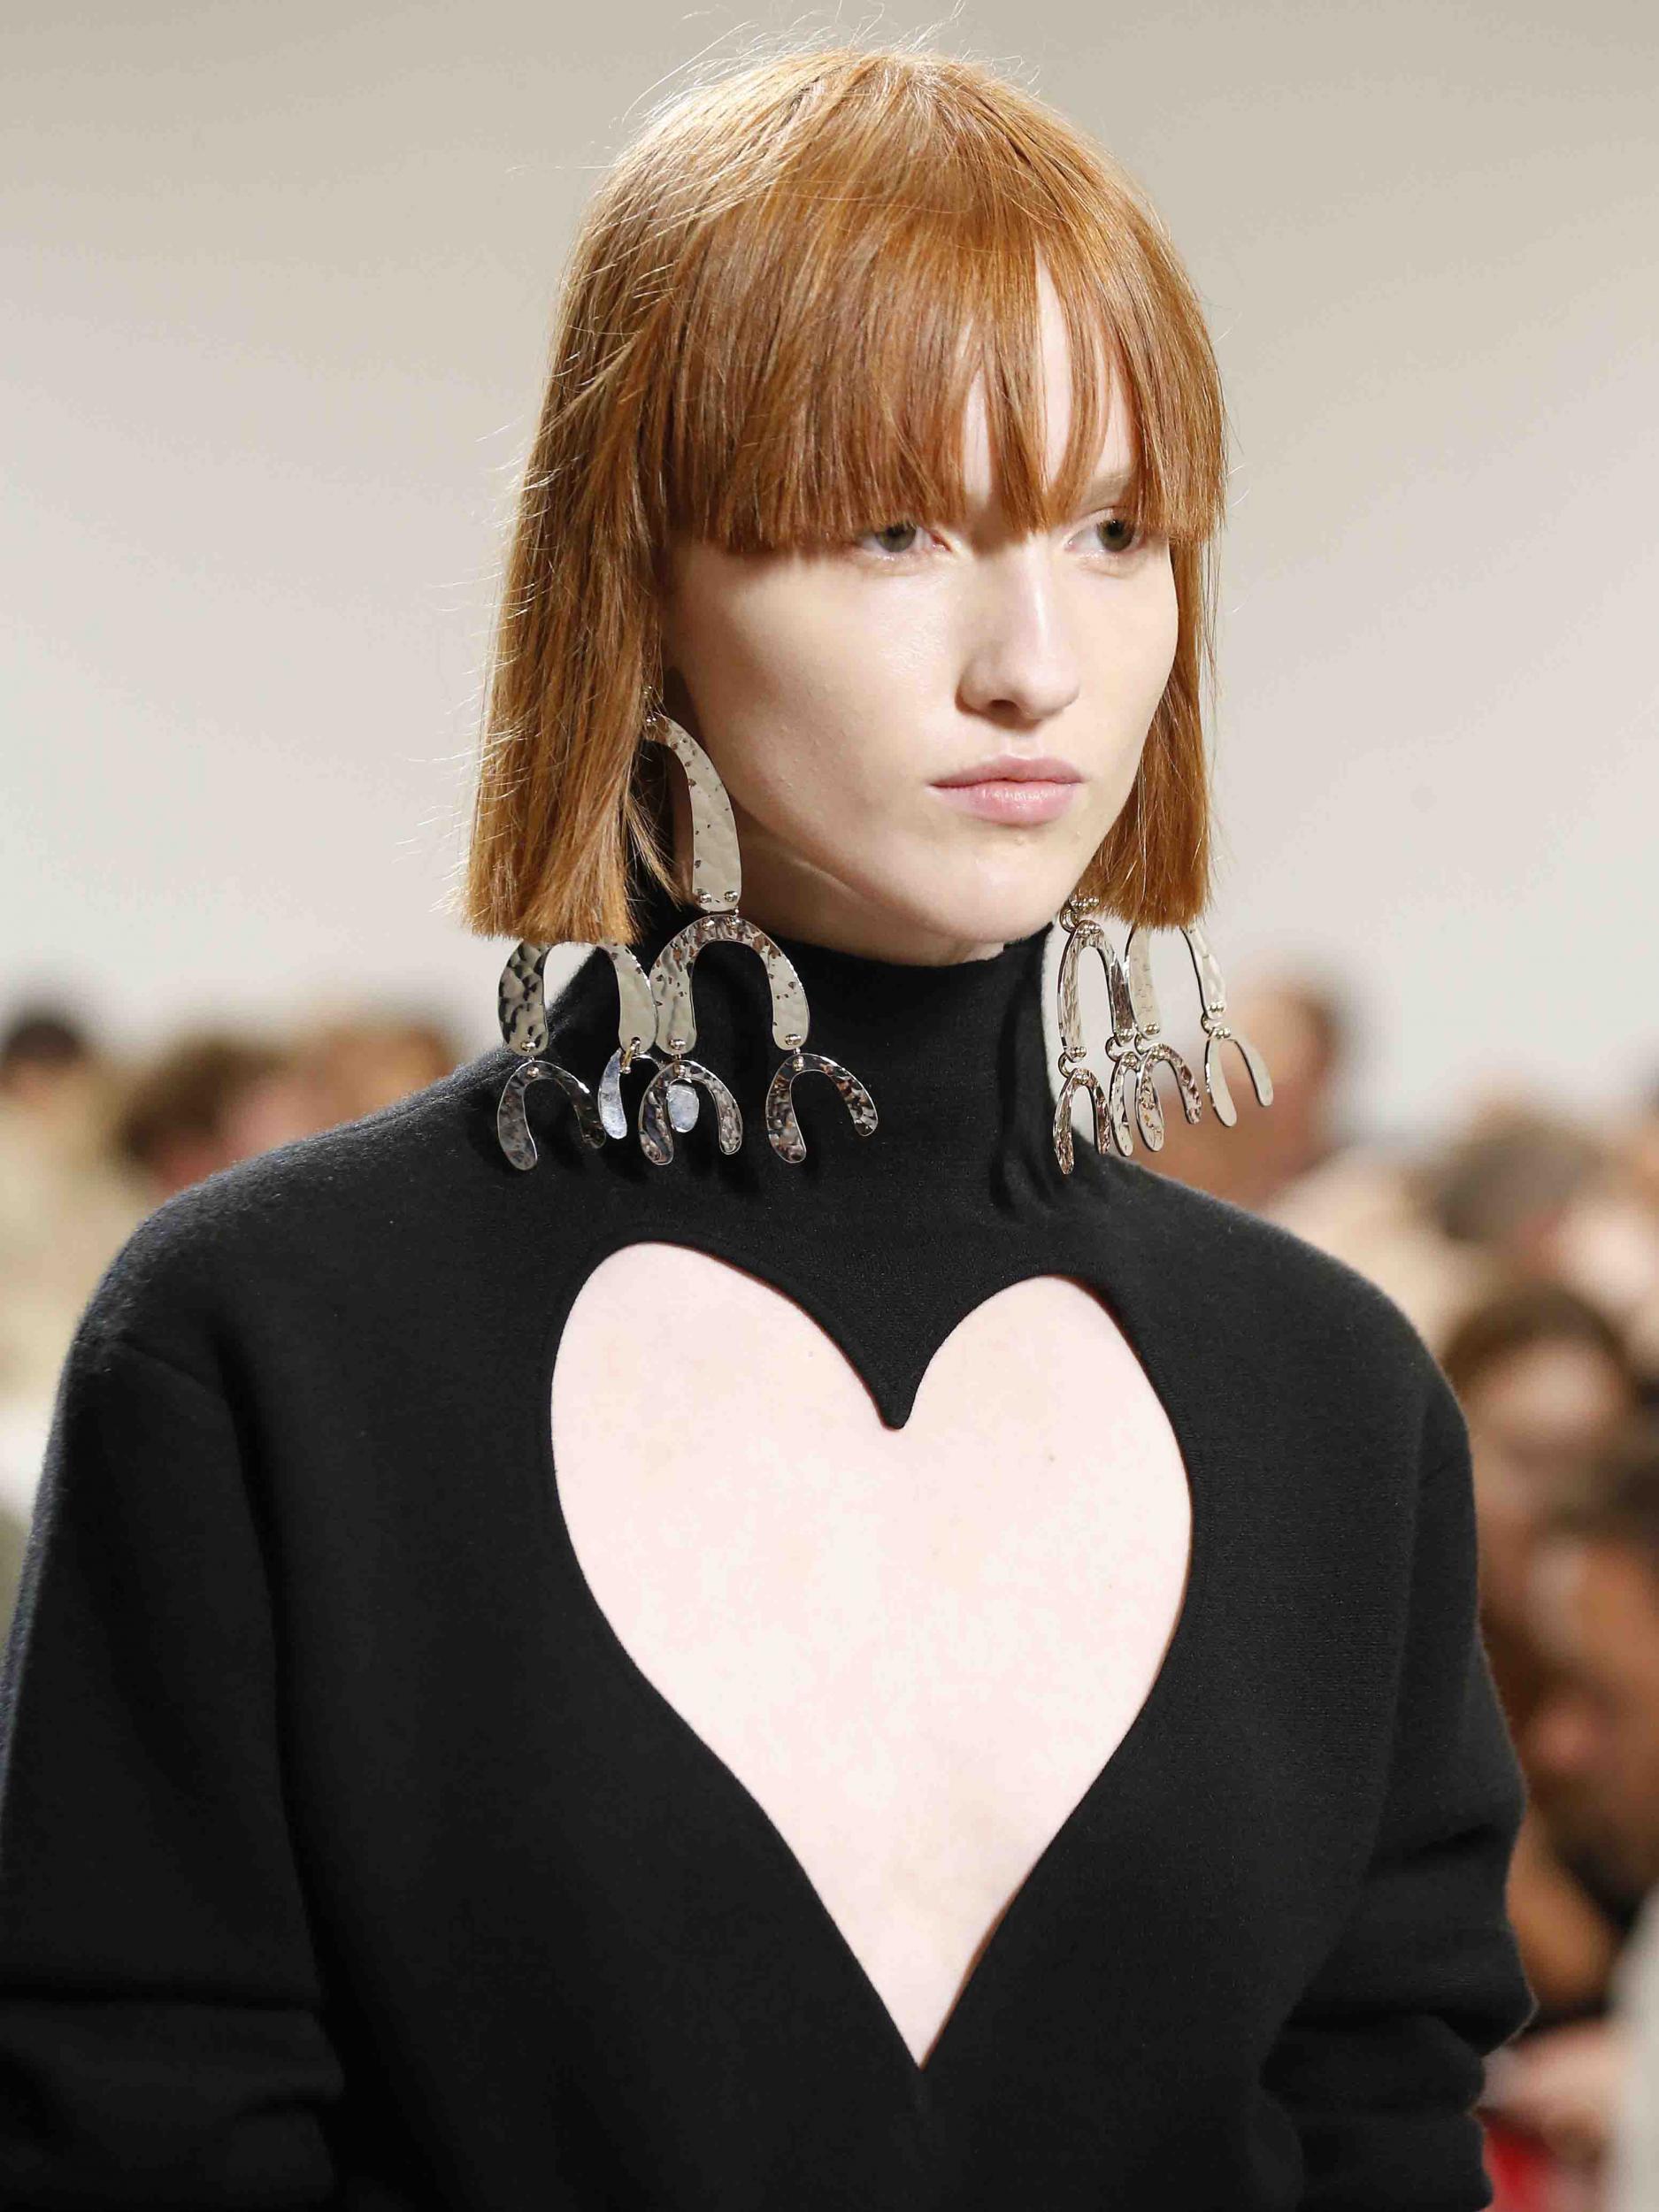 Proenza Schouler opted for a revealing heart shaped cut-out